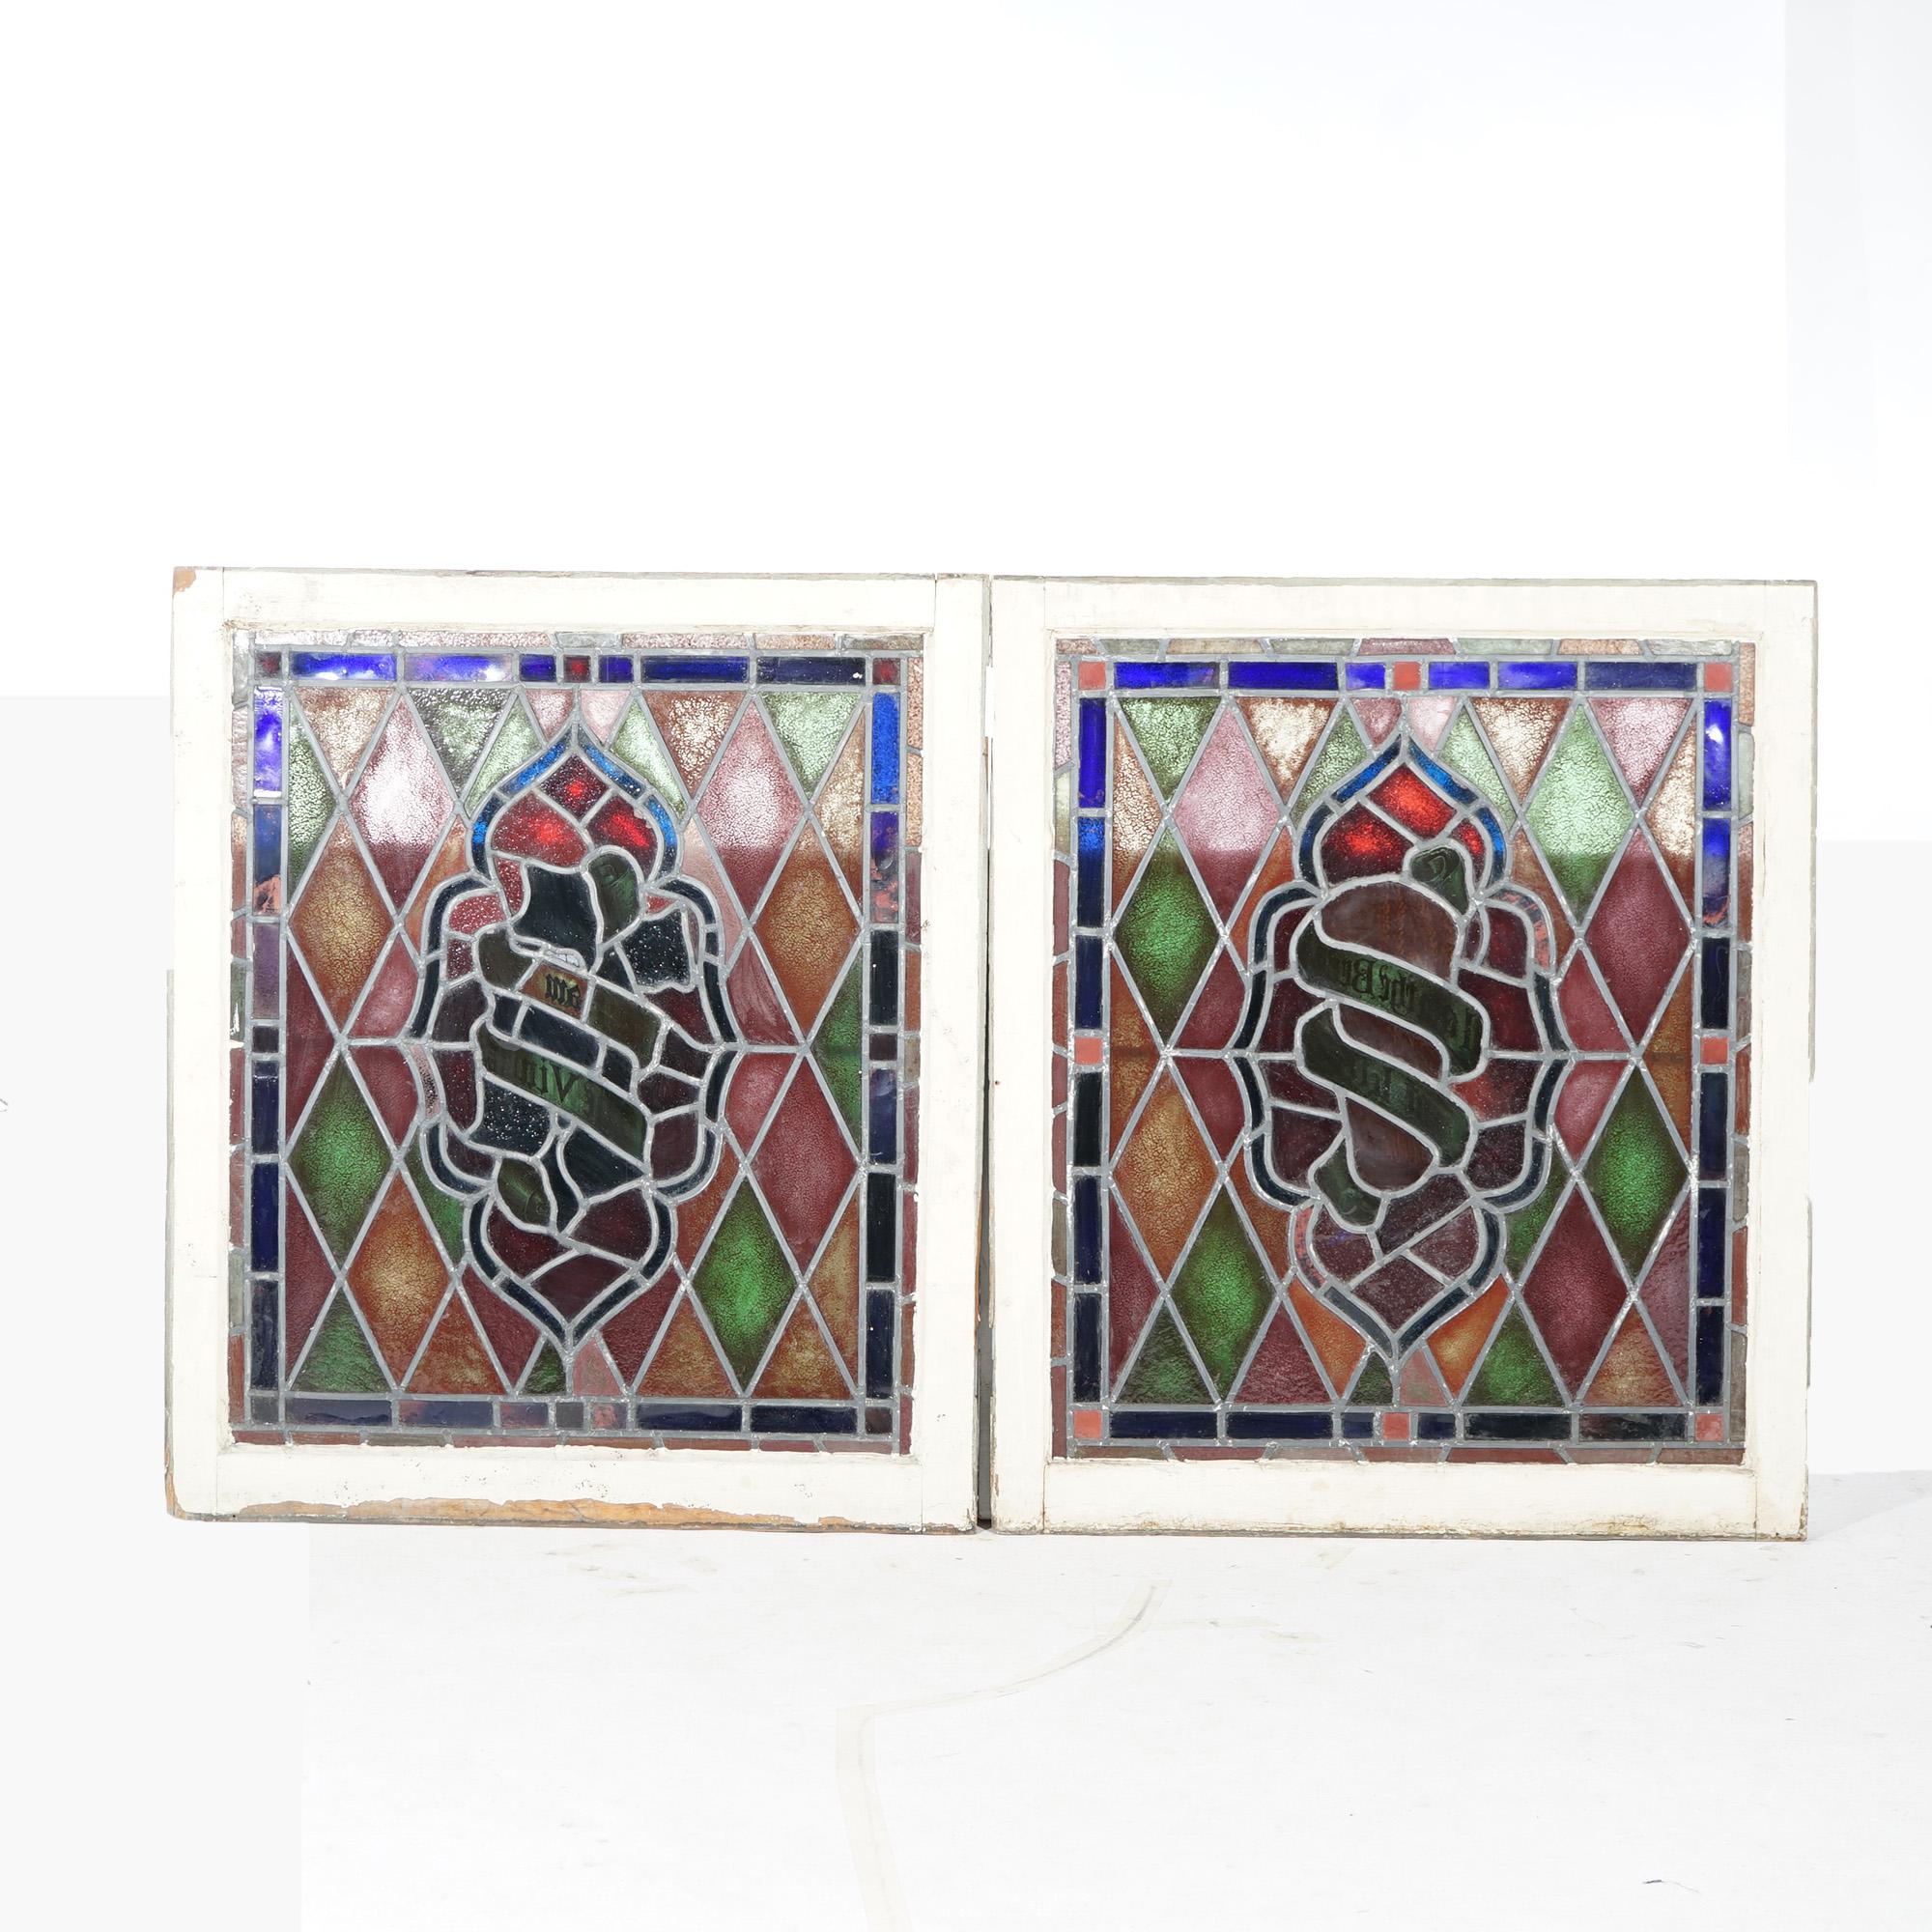 An antique pair of Arts and /crafts windows offer leaded stained glass construction with stylized foliate central design in argyle ground, seated in wood sash, c1900

Measures - 41.75